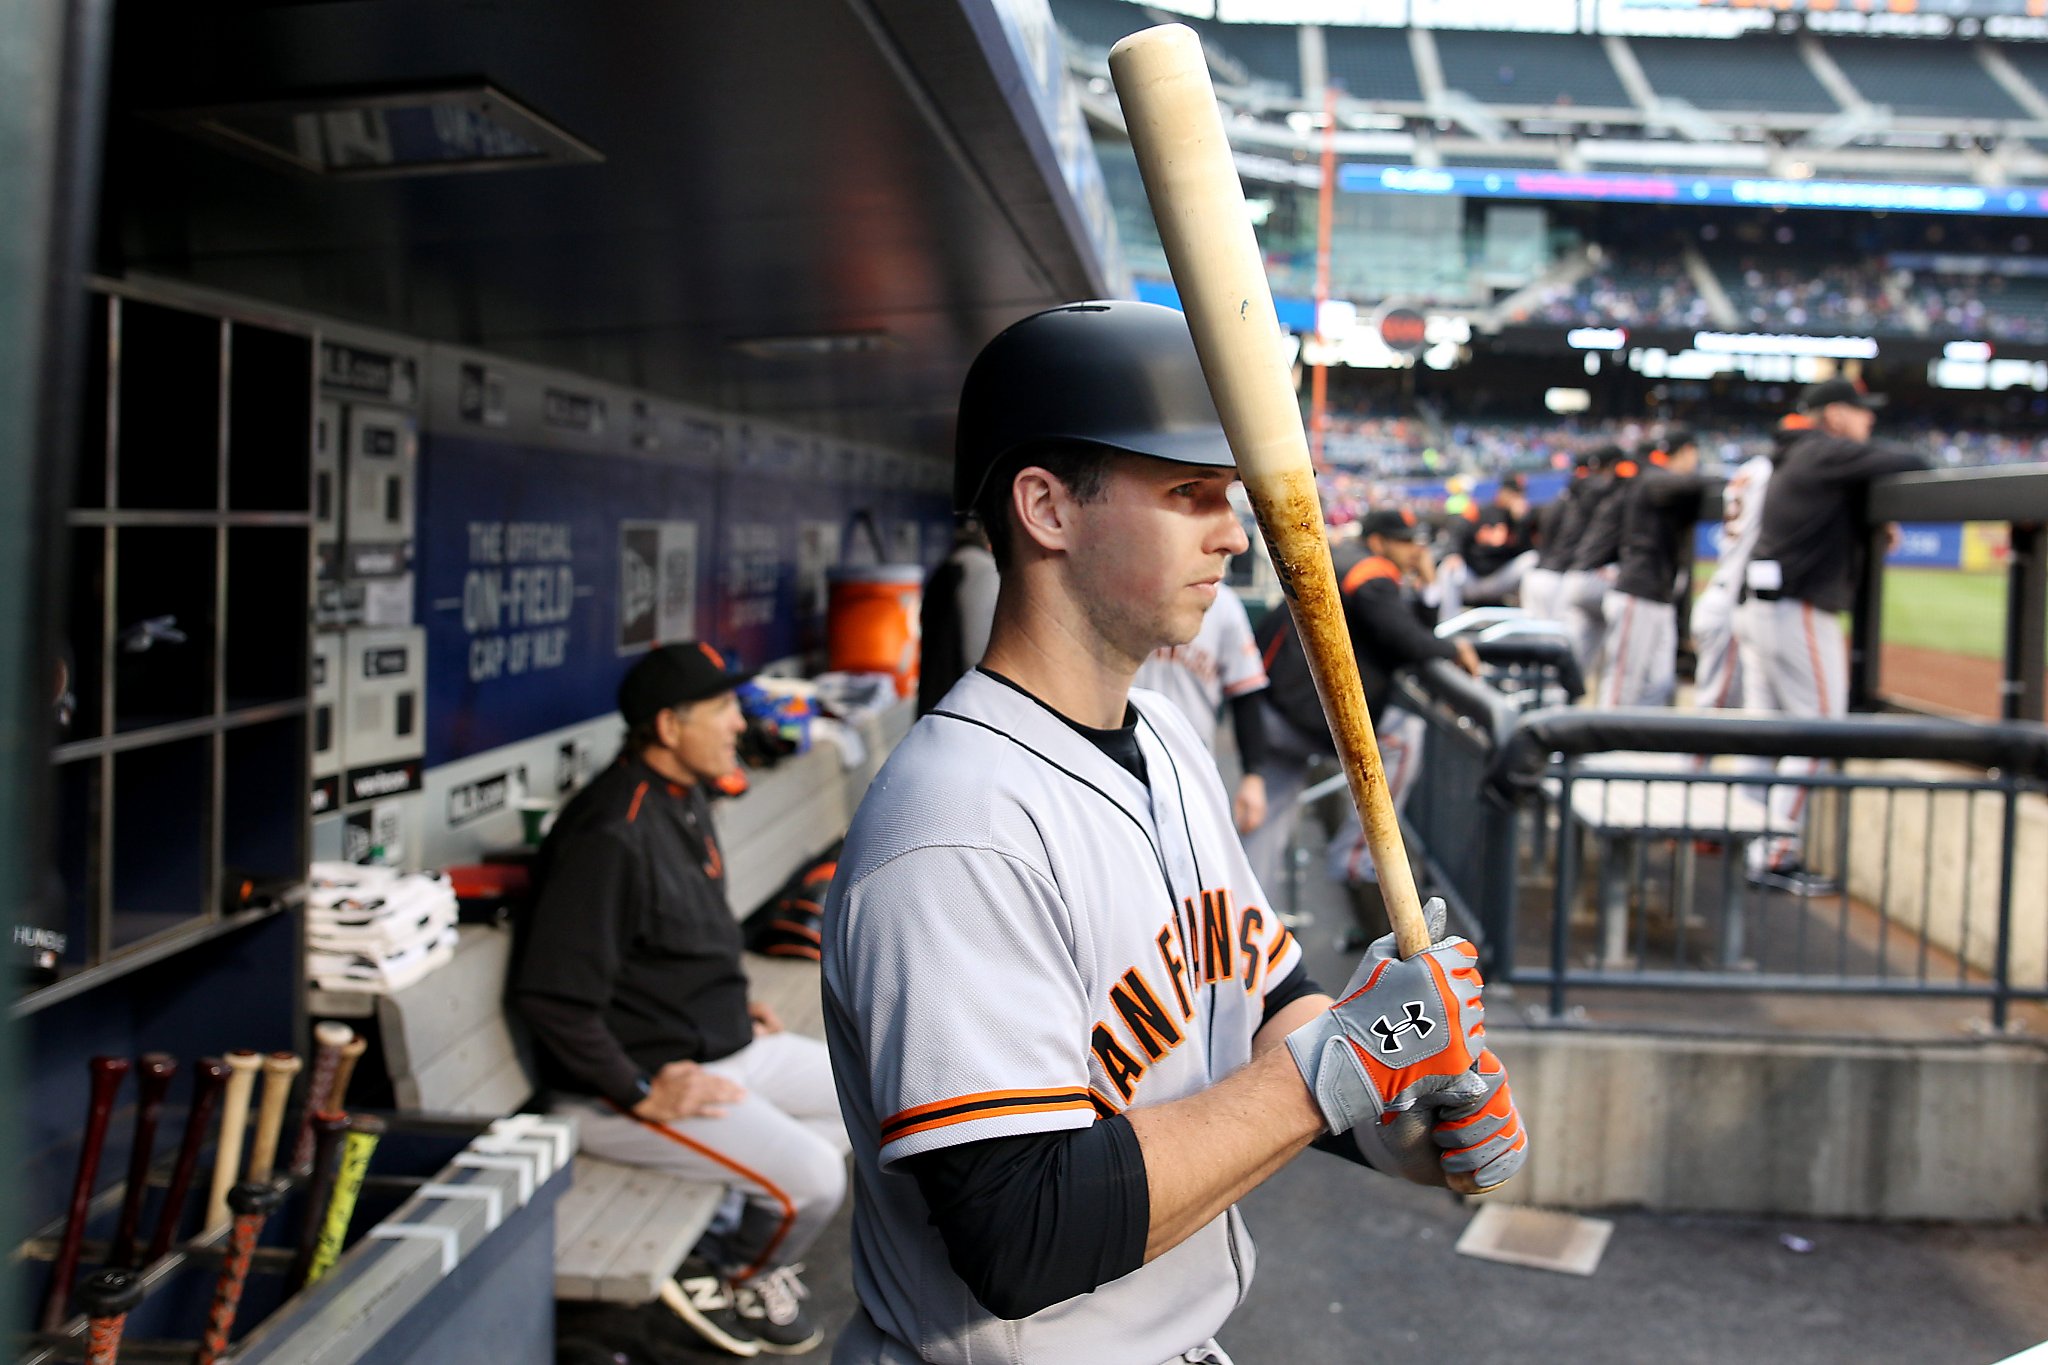 SF Giants to honor Buster Posey, the newest Little League coach